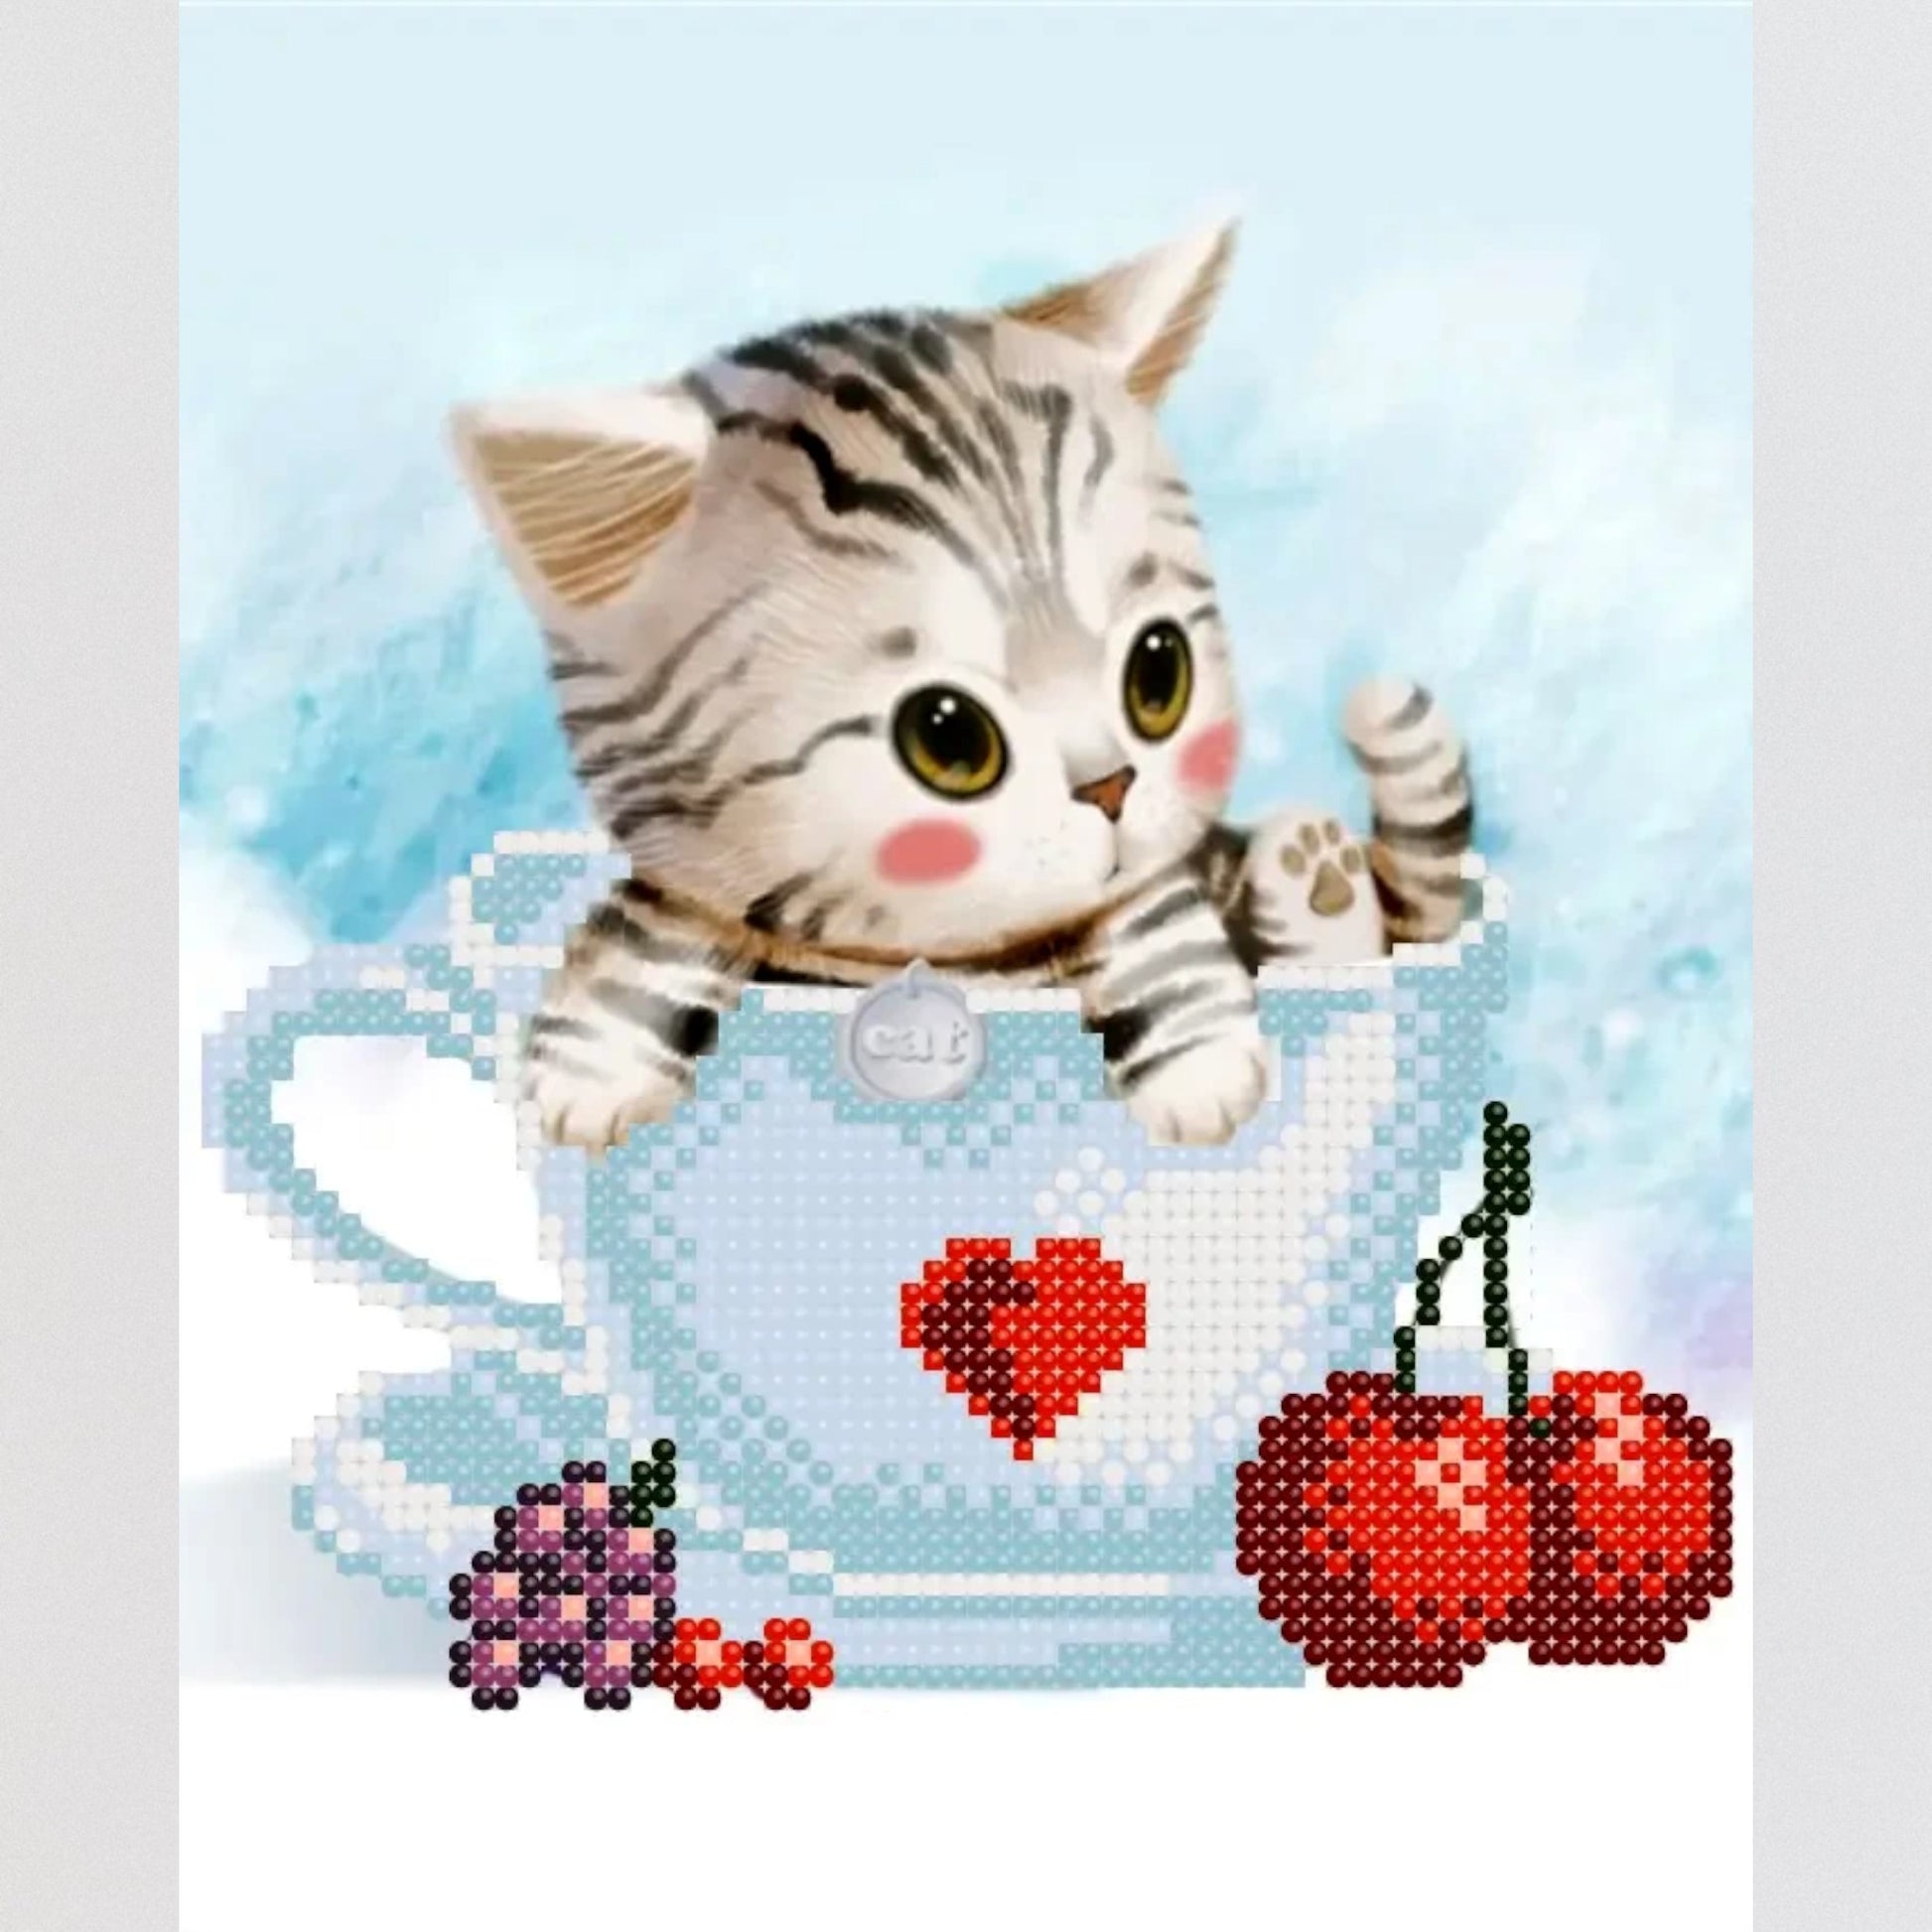 DIY Bead embroidery kit  "Kitten in a cup". Size: 5.9 - 7.5 in (15 - 19cm) - VadymShop